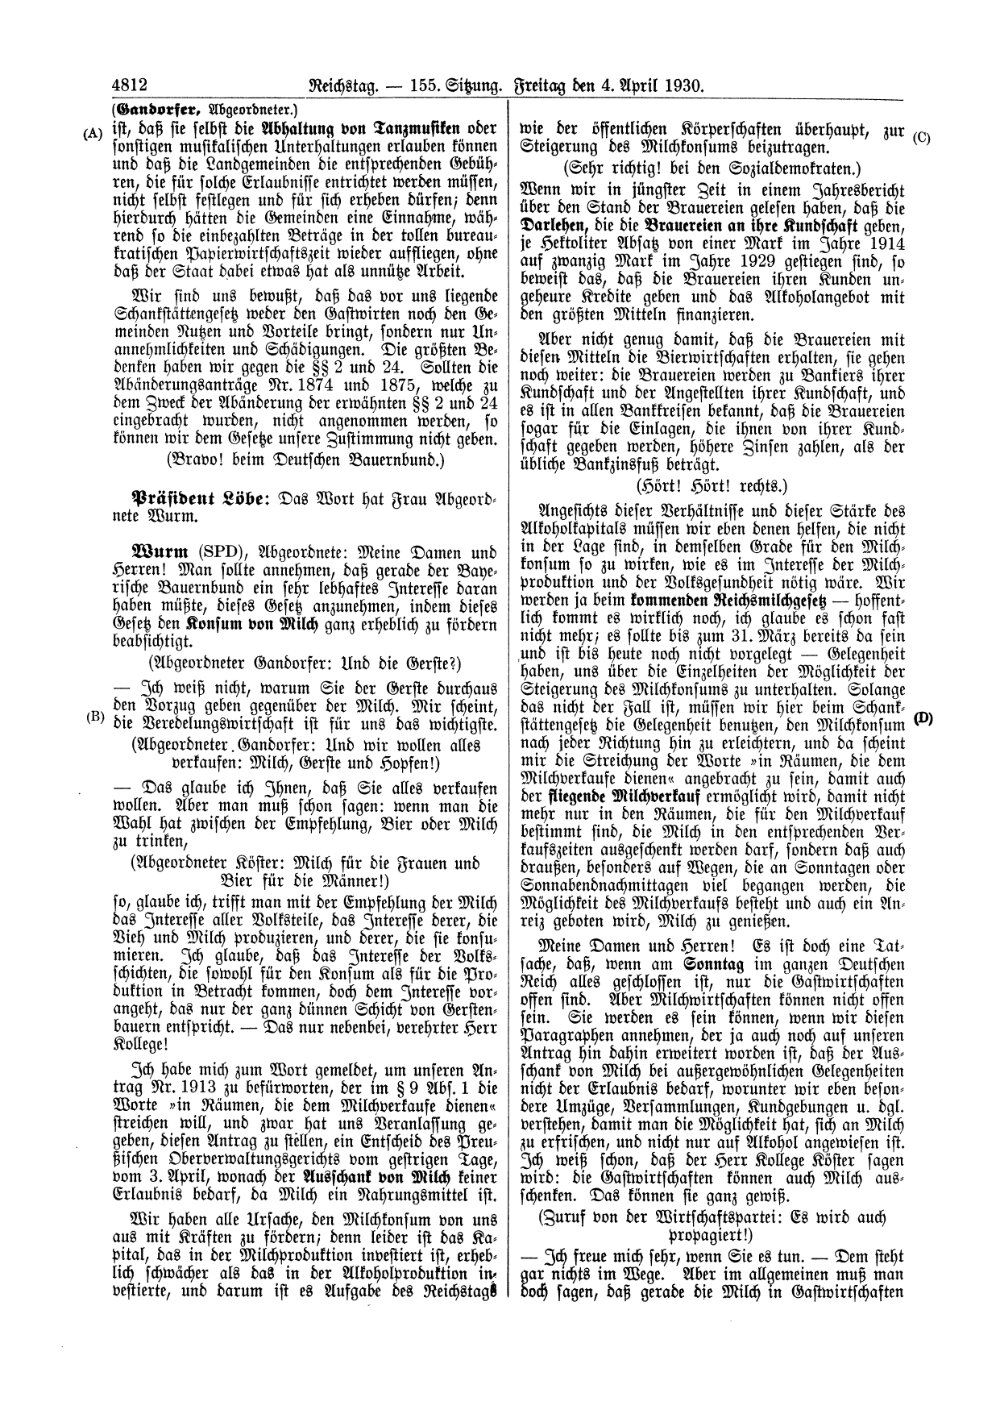 Scan of page 4812